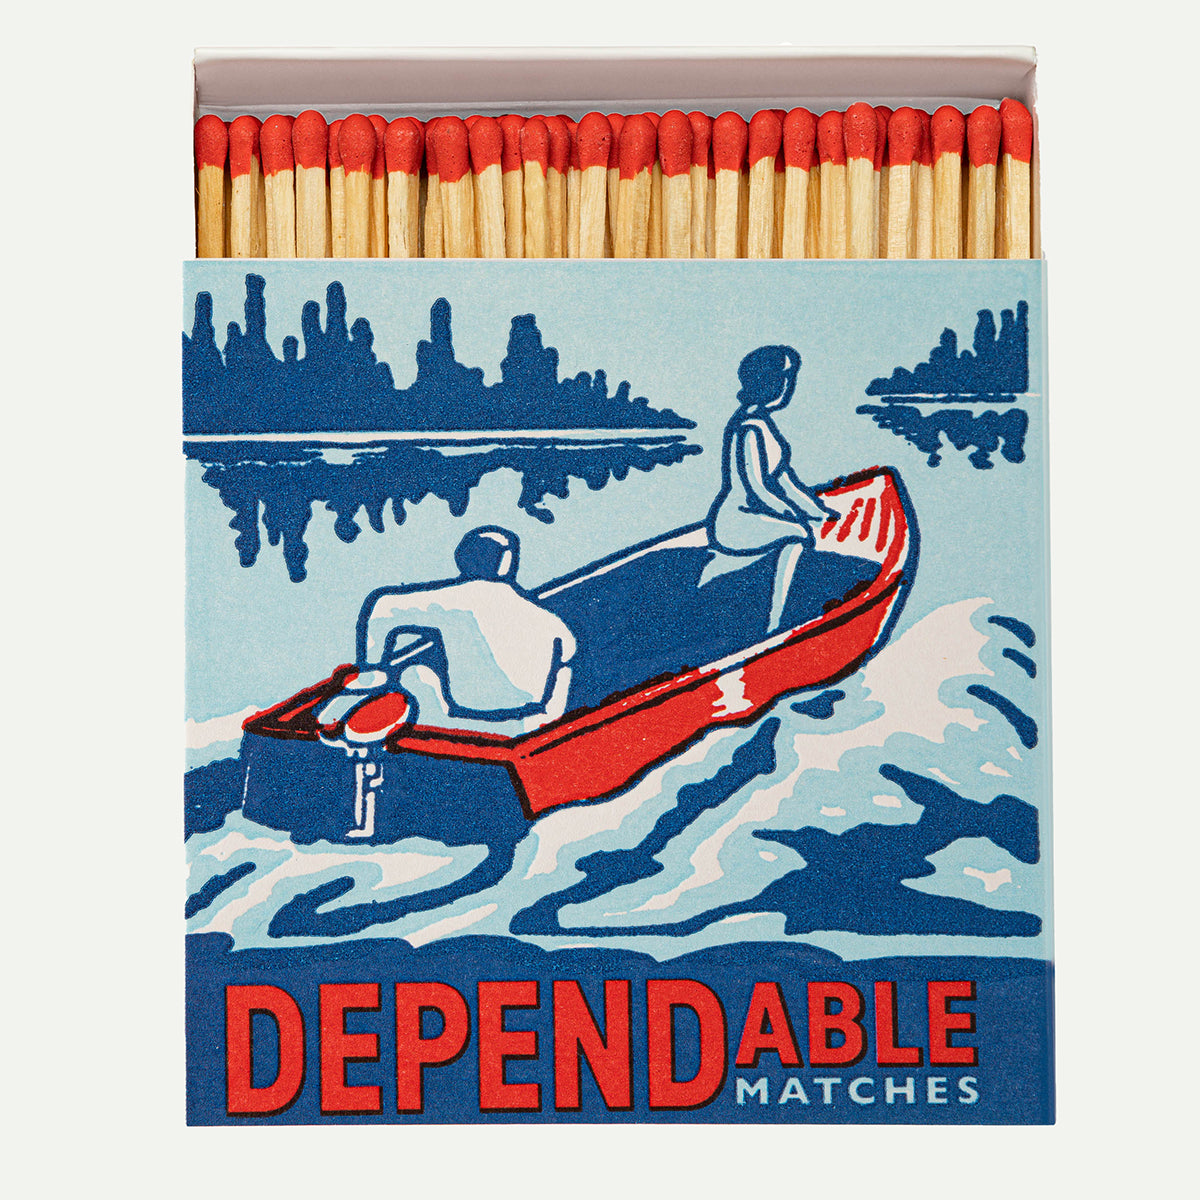 Archivist Dependable Safety Matches